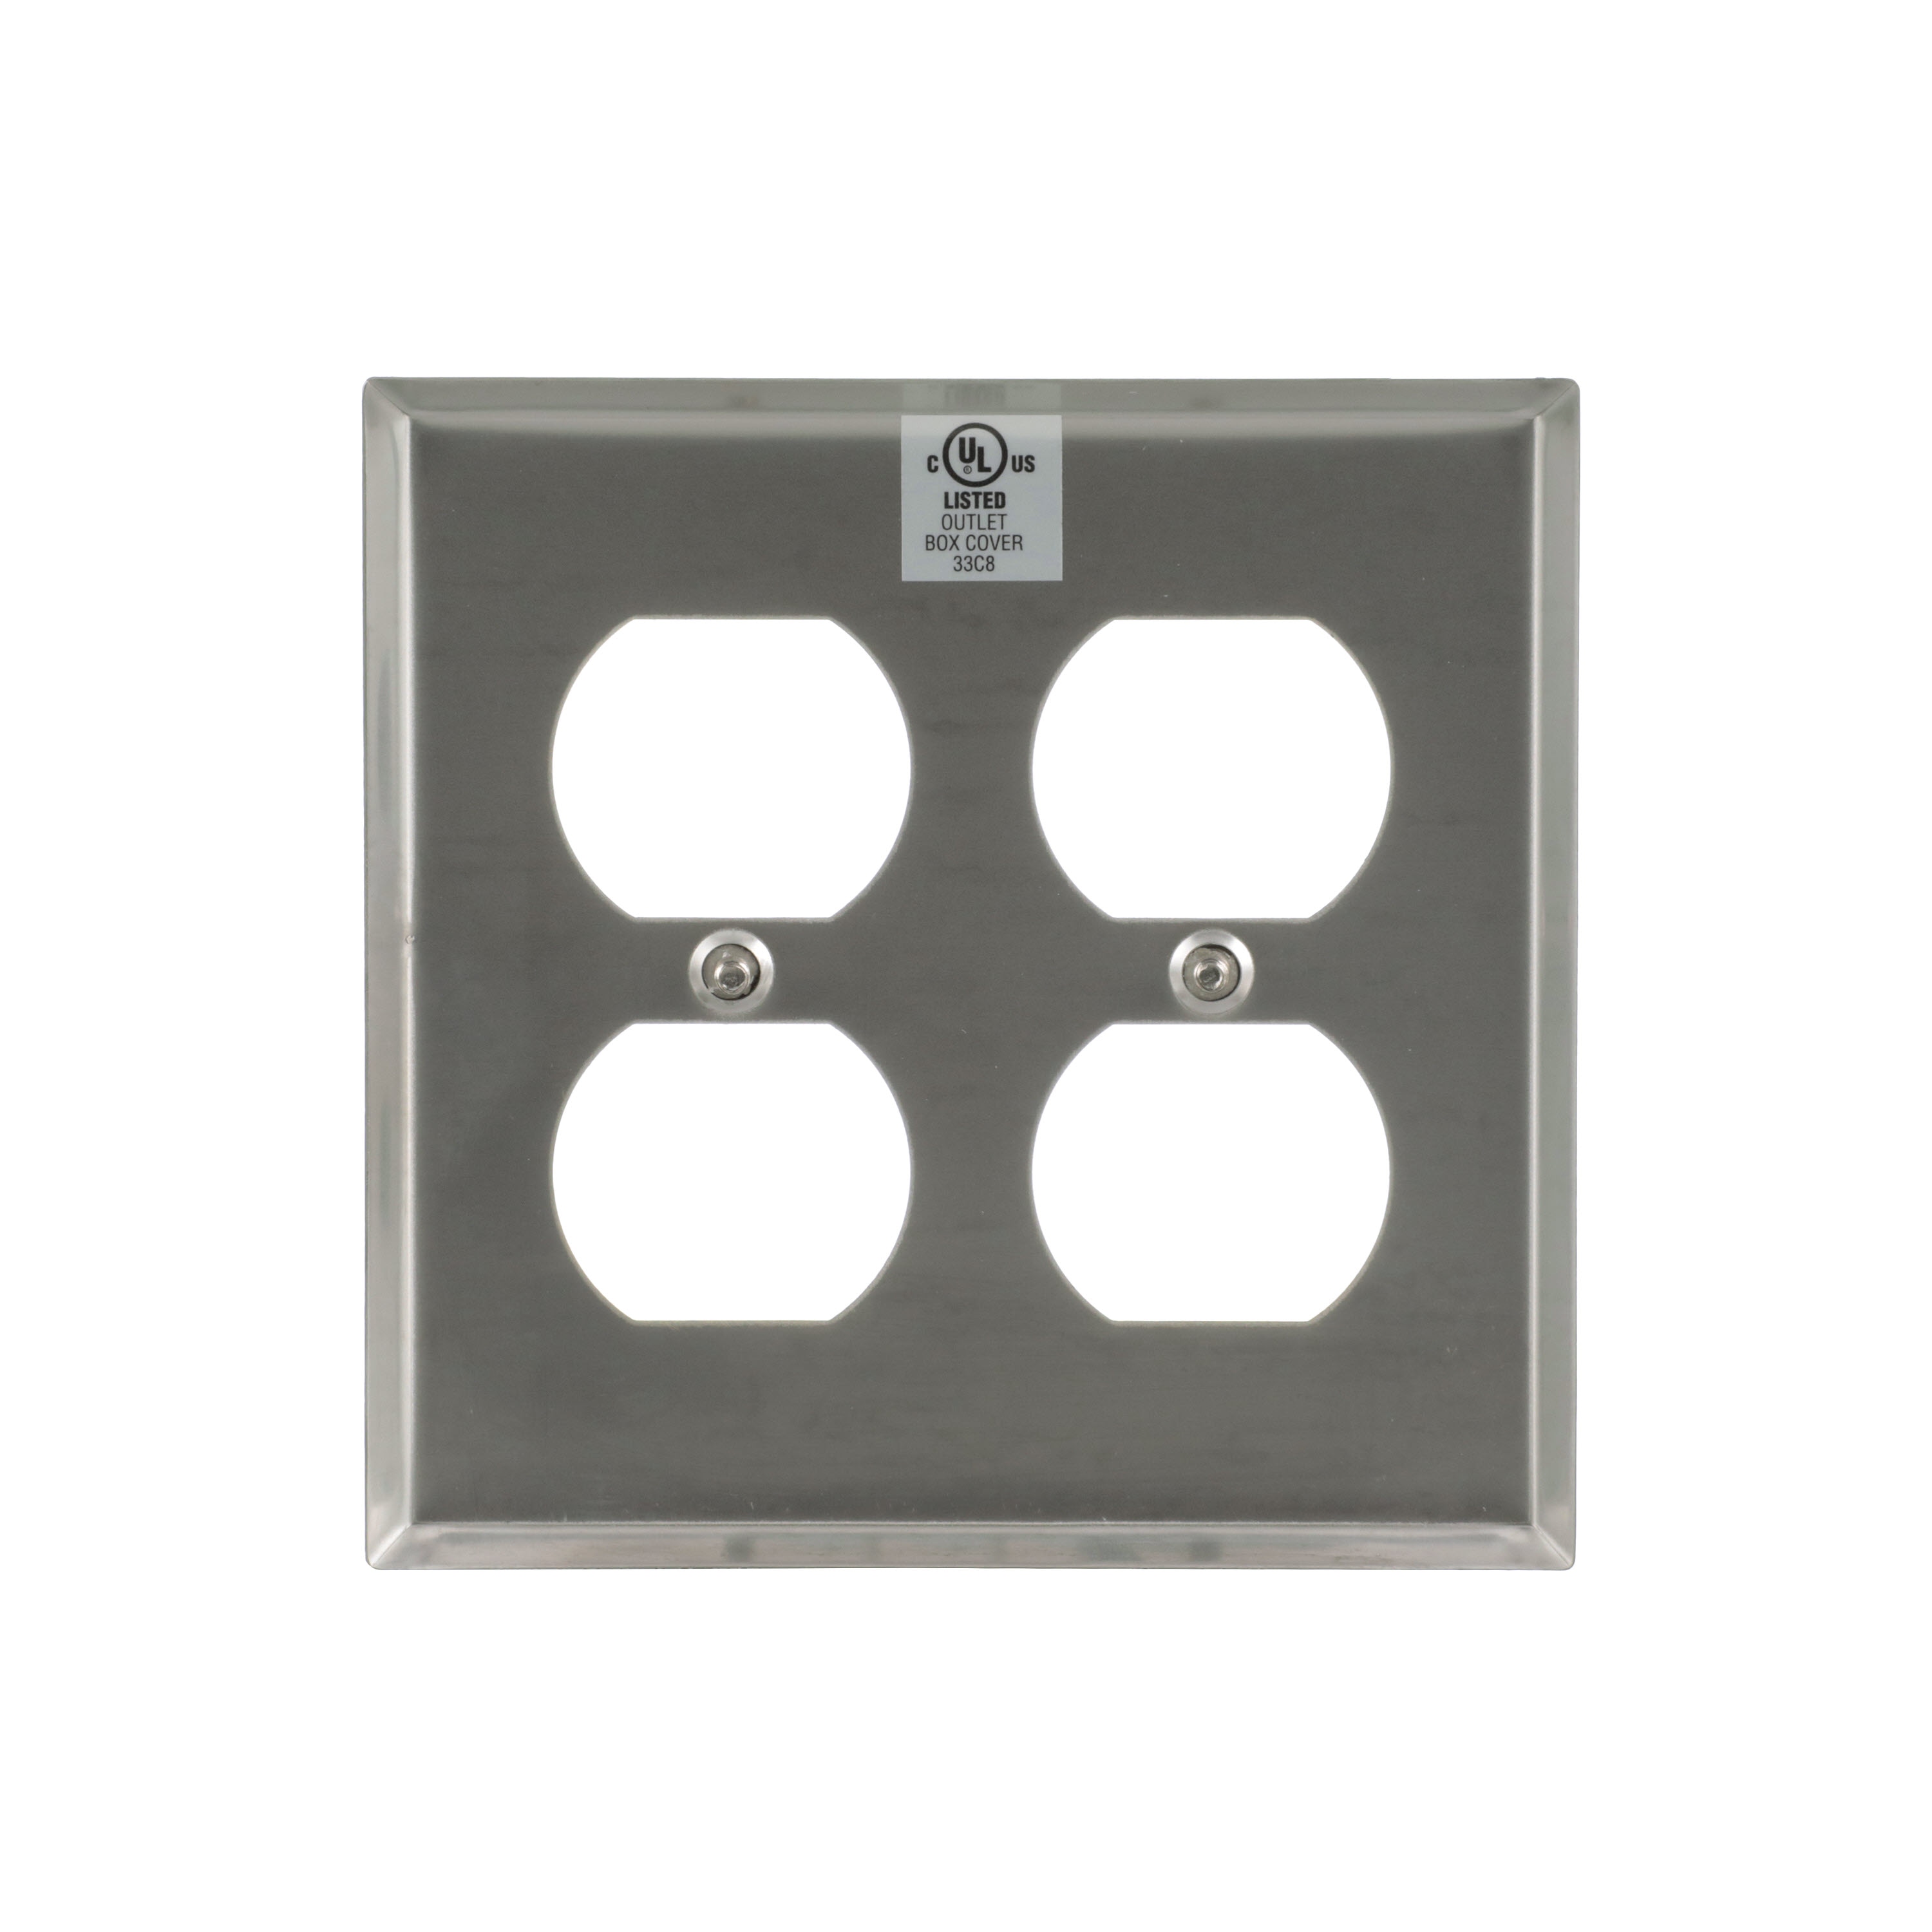 Jazzy Wallplates - Sports - Single Duplex Outlet with Old Lu lsp_987_6